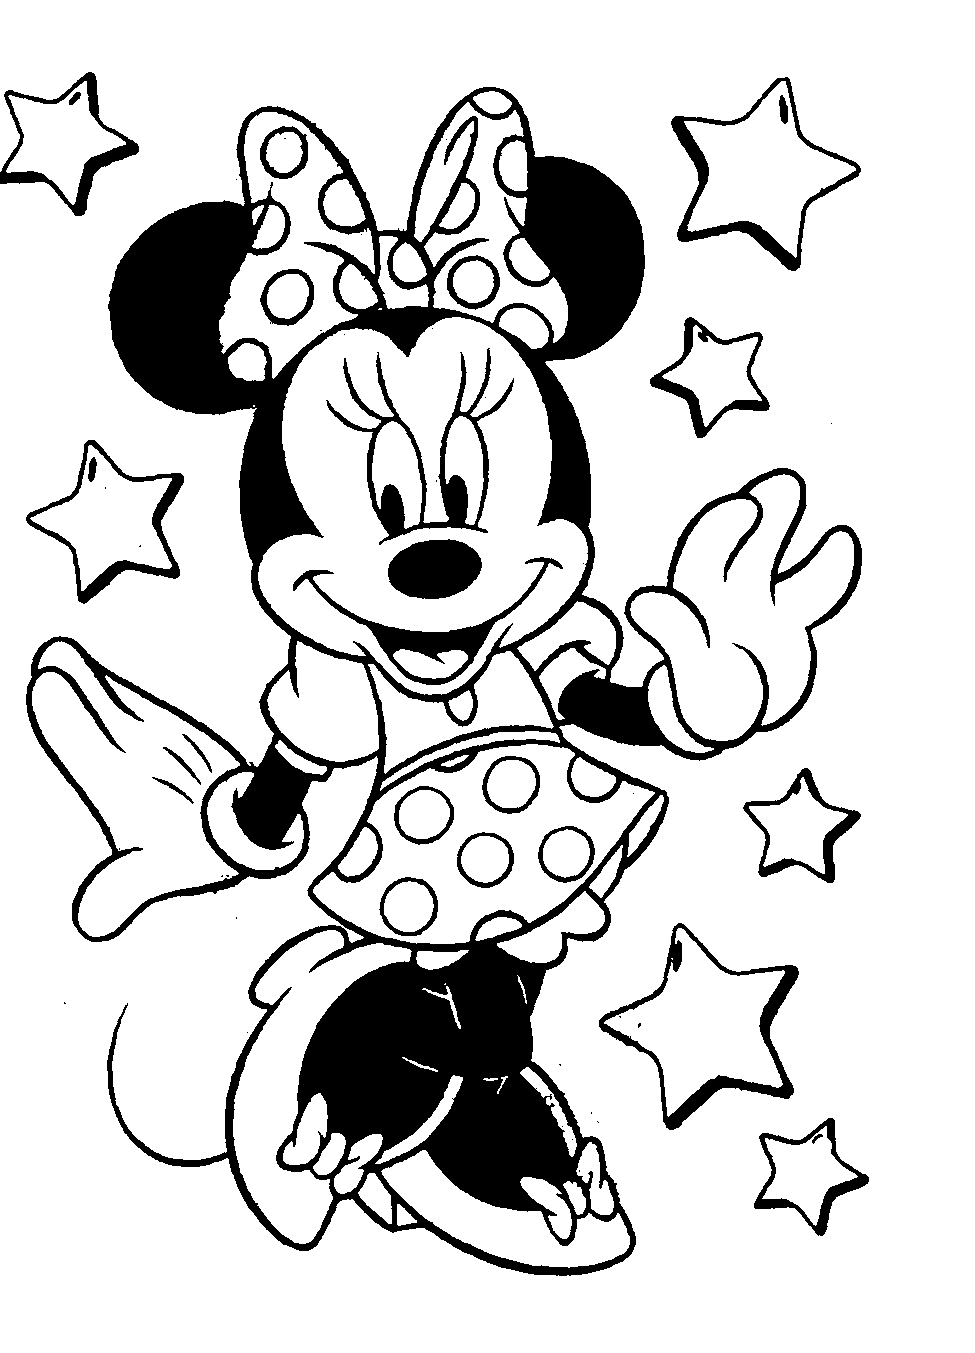 mickey and minnie mouse coloring pages 1000 images about mickey mouse friends colouring pages mouse mickey and pages coloring minnie 